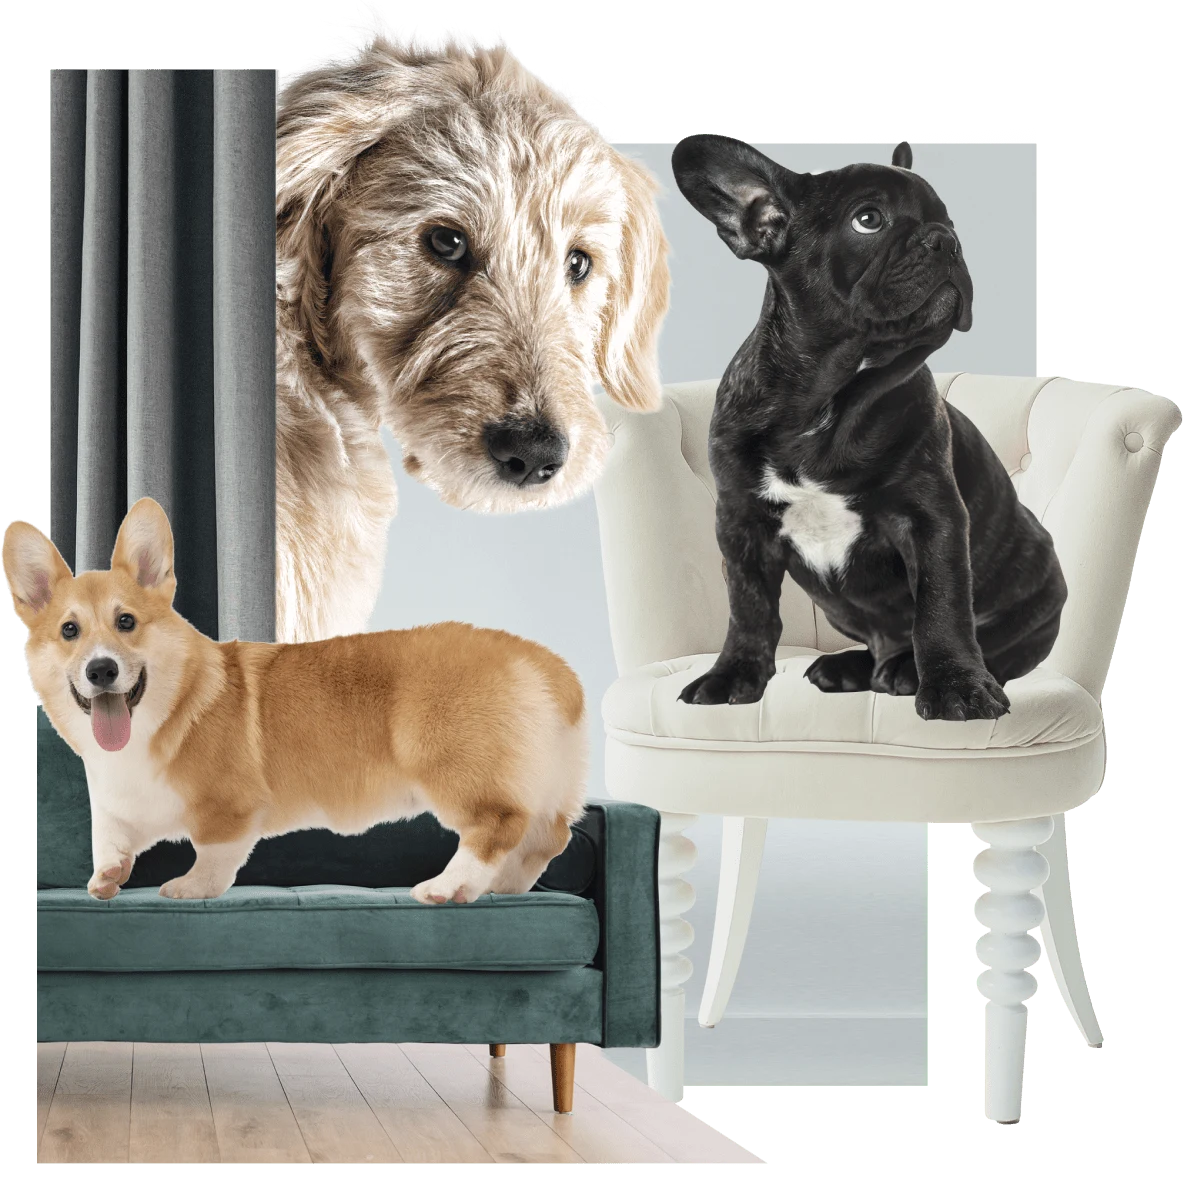 Corgi on a green couch at left. French bulldog on a white chair at right. Irish Wolfhound at back peeking its head out from behind a green curtain.